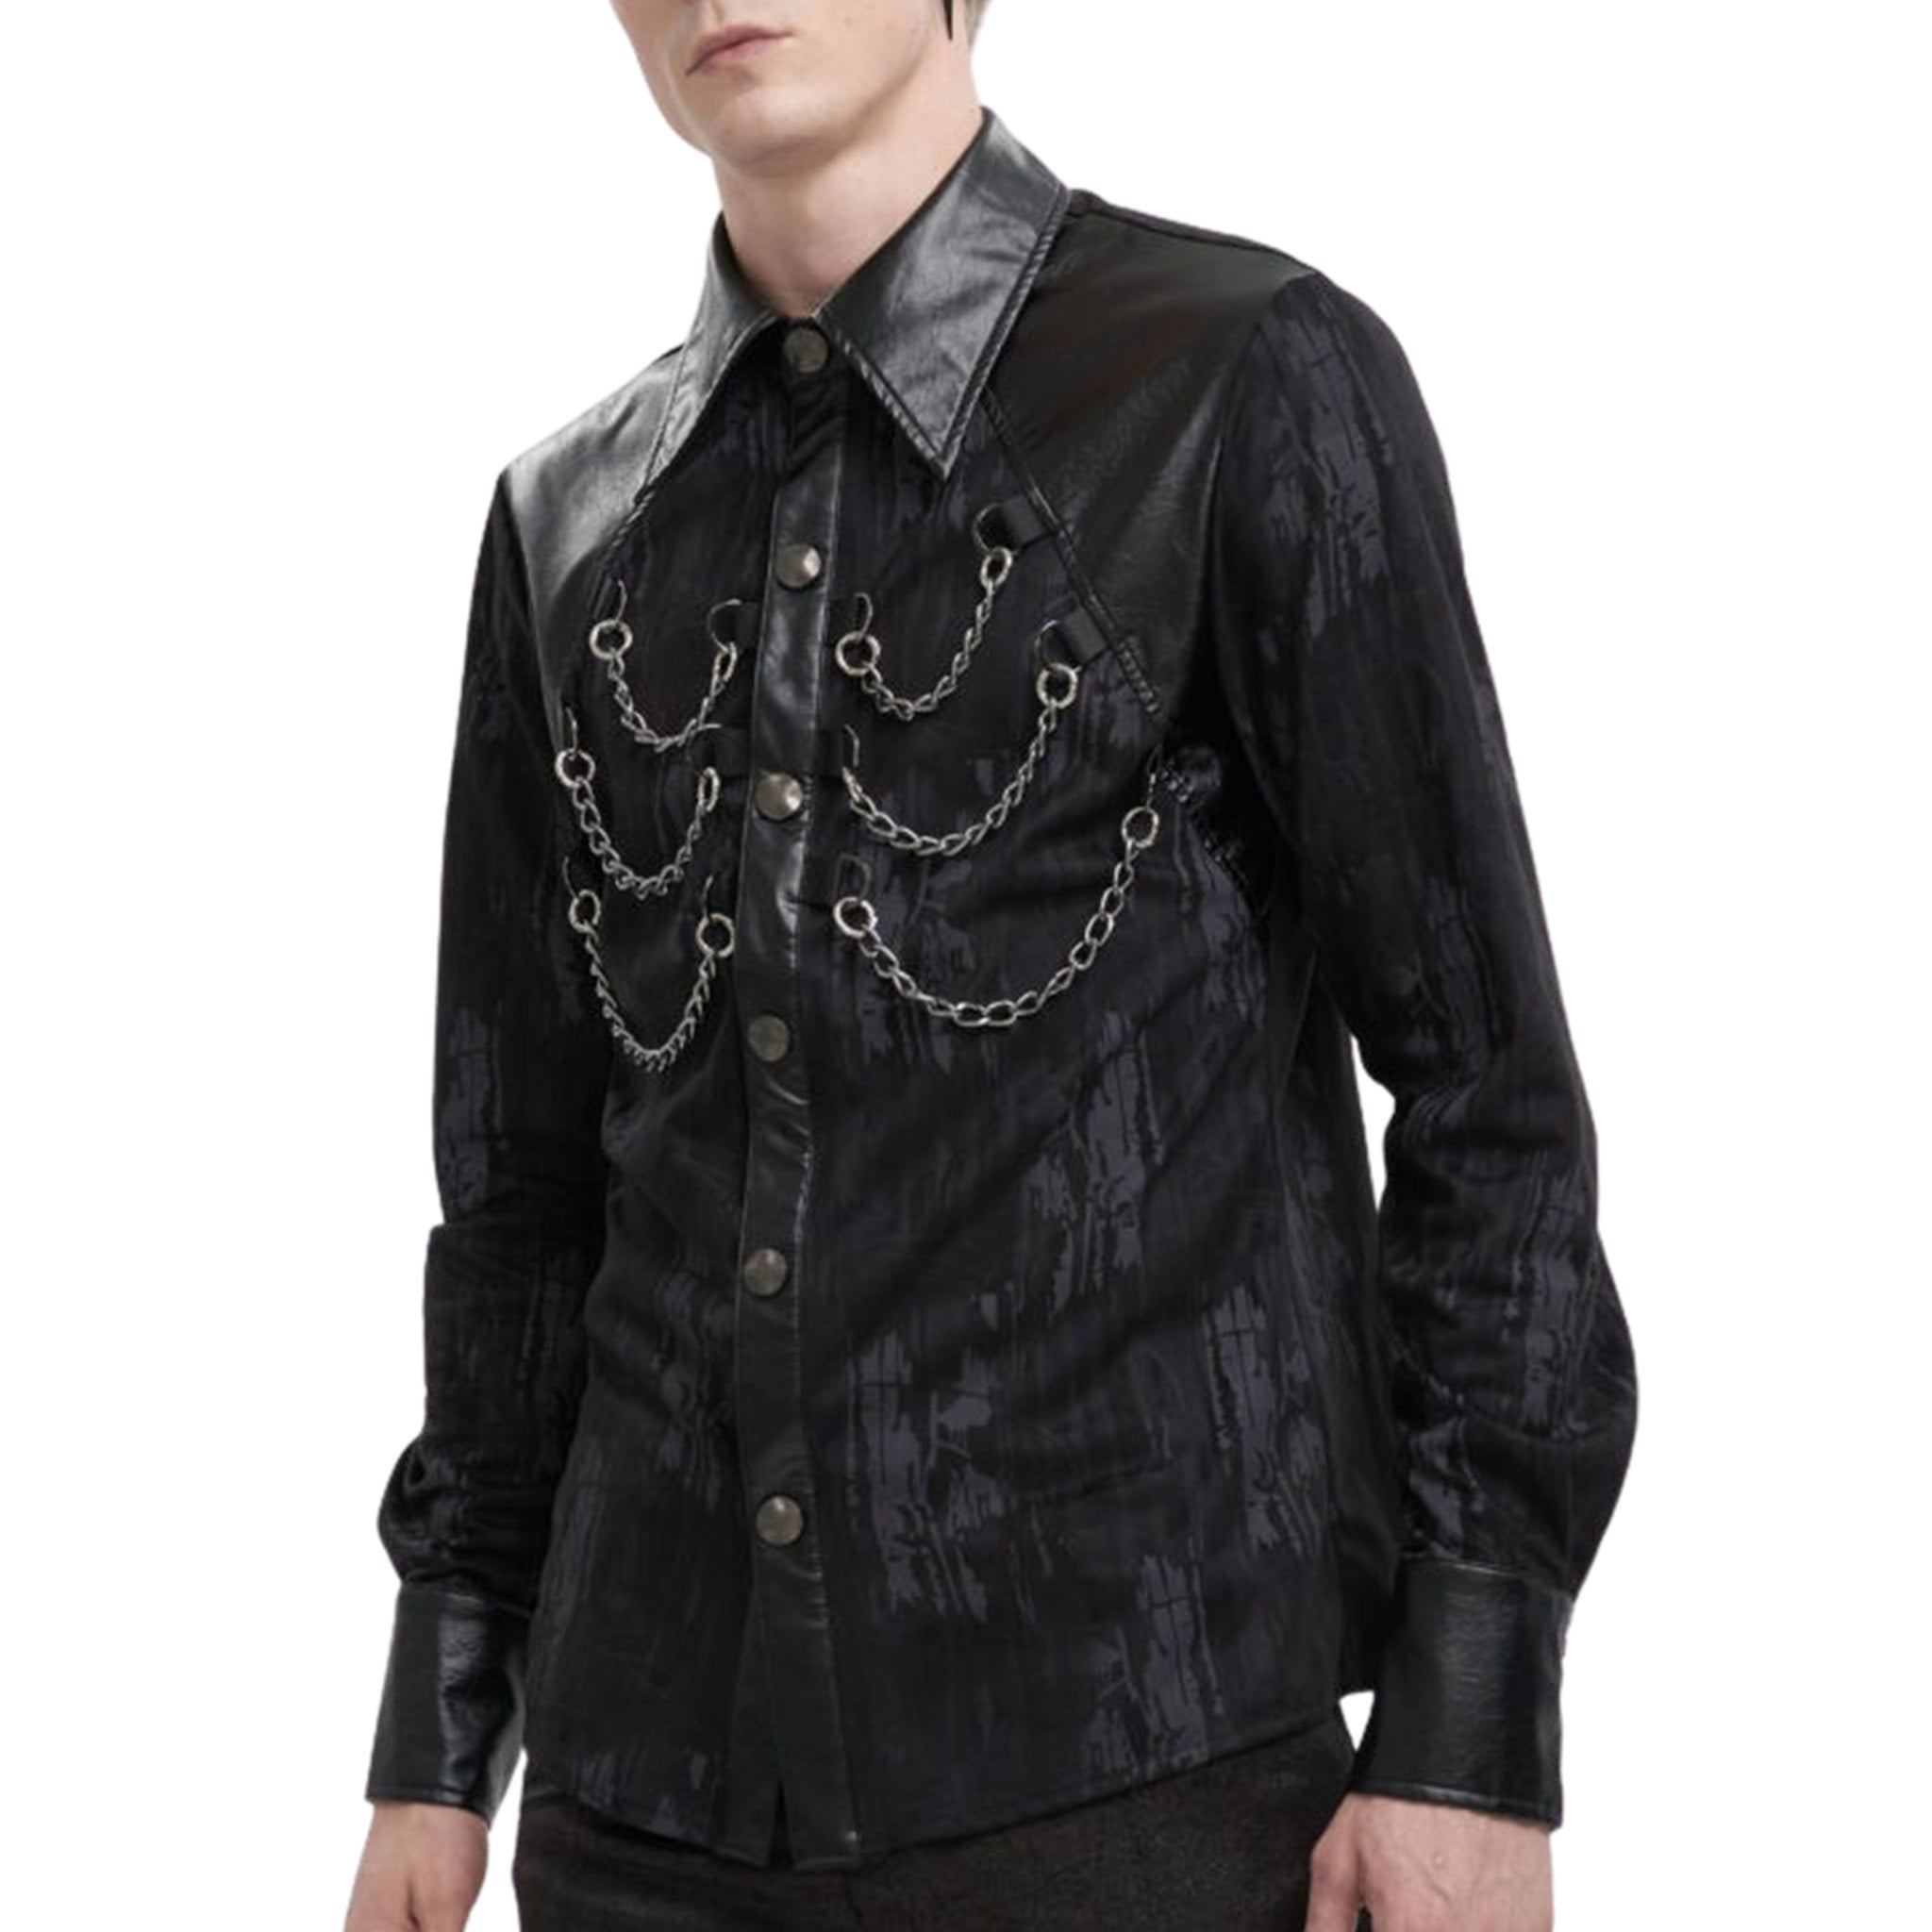 Vegan Leather Collar Long Sleeve Distressed Shirt With Chains